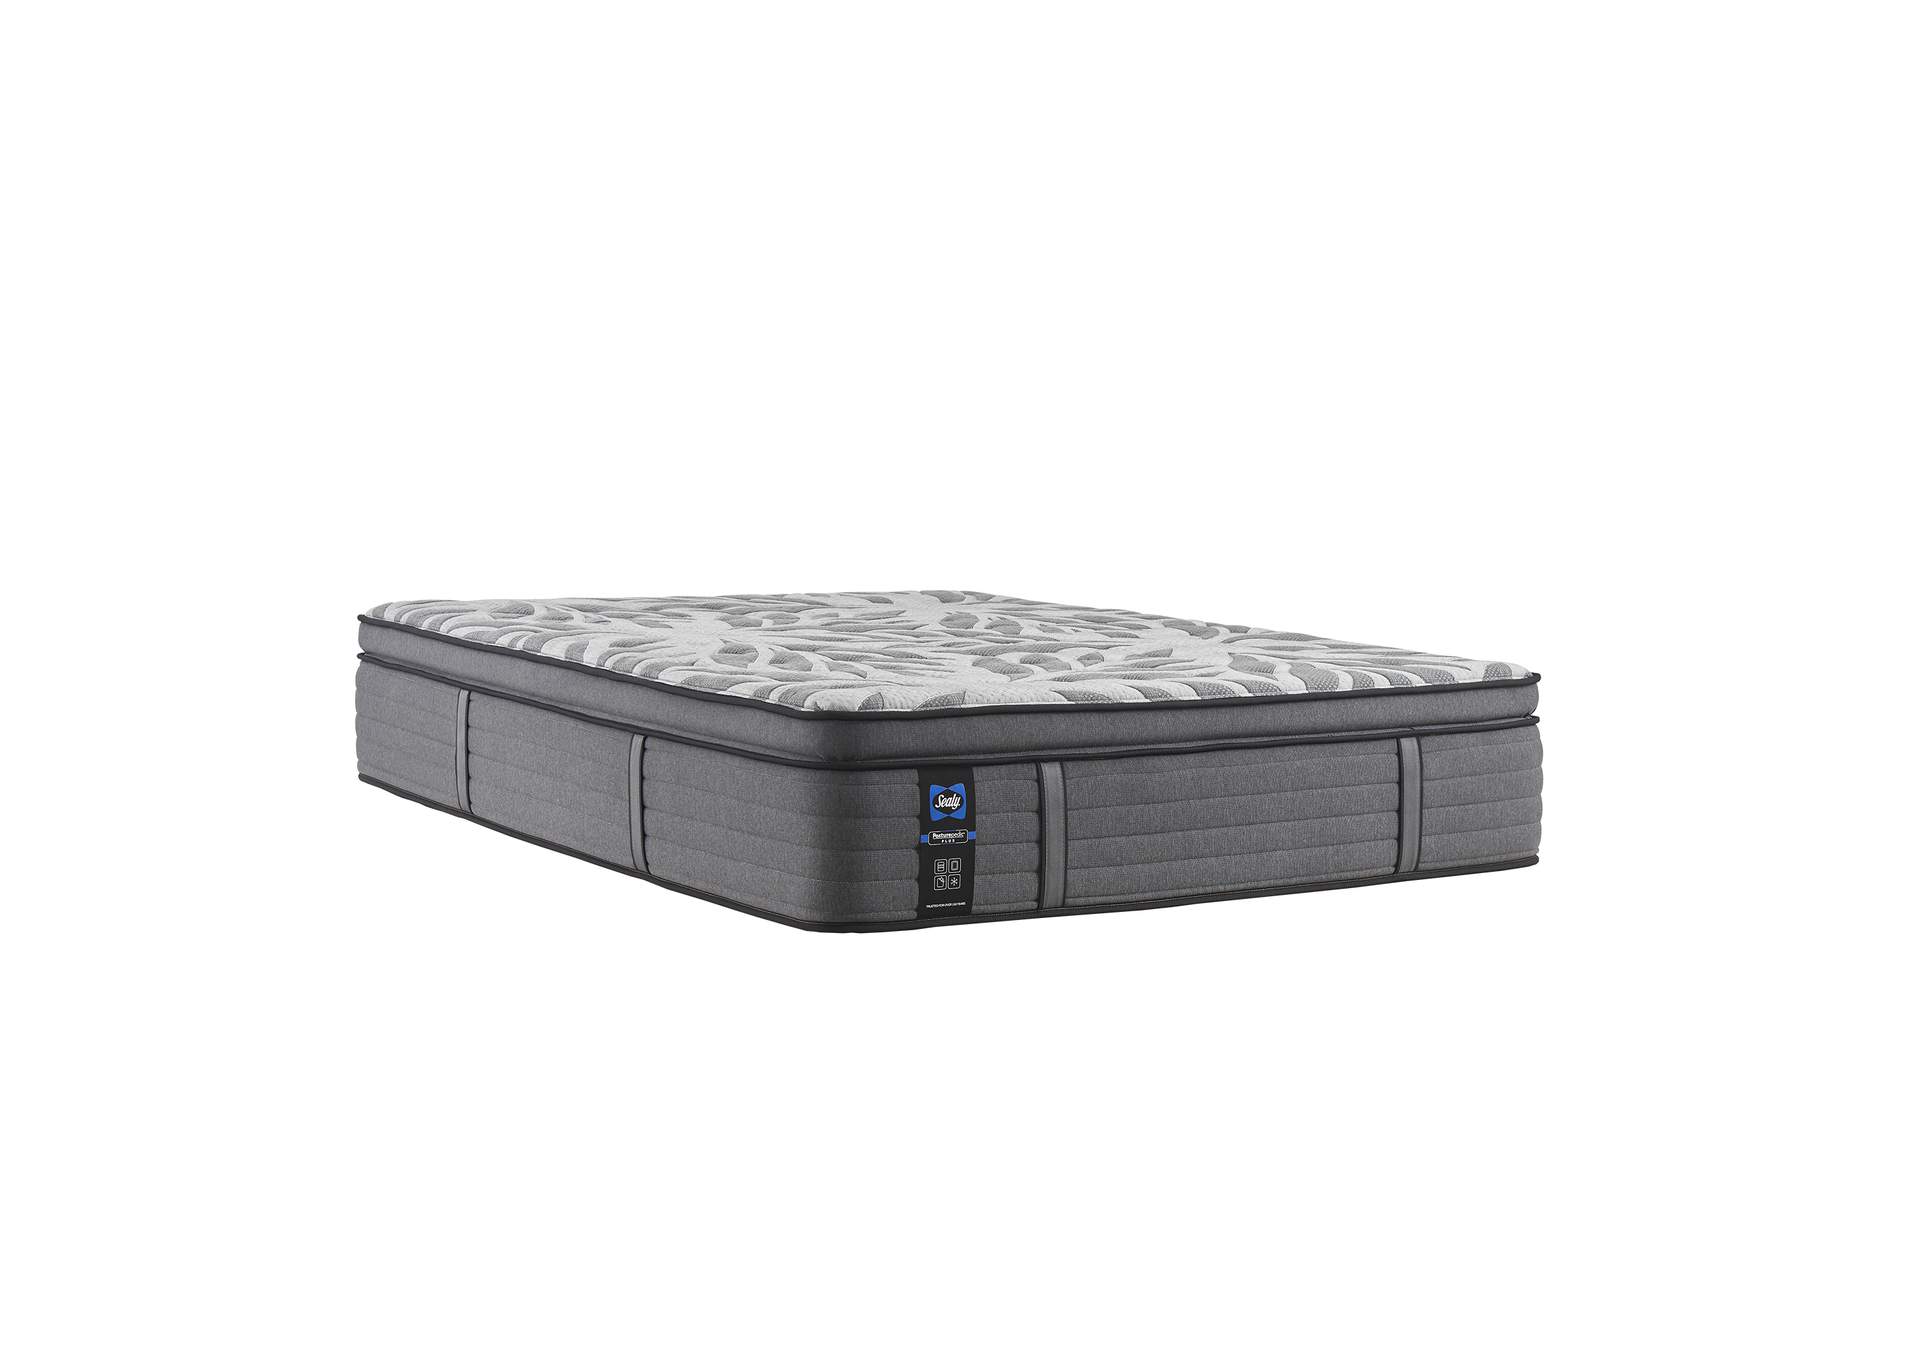 Satisfied II Soft Pillow Top Twin Mattress,Sealy